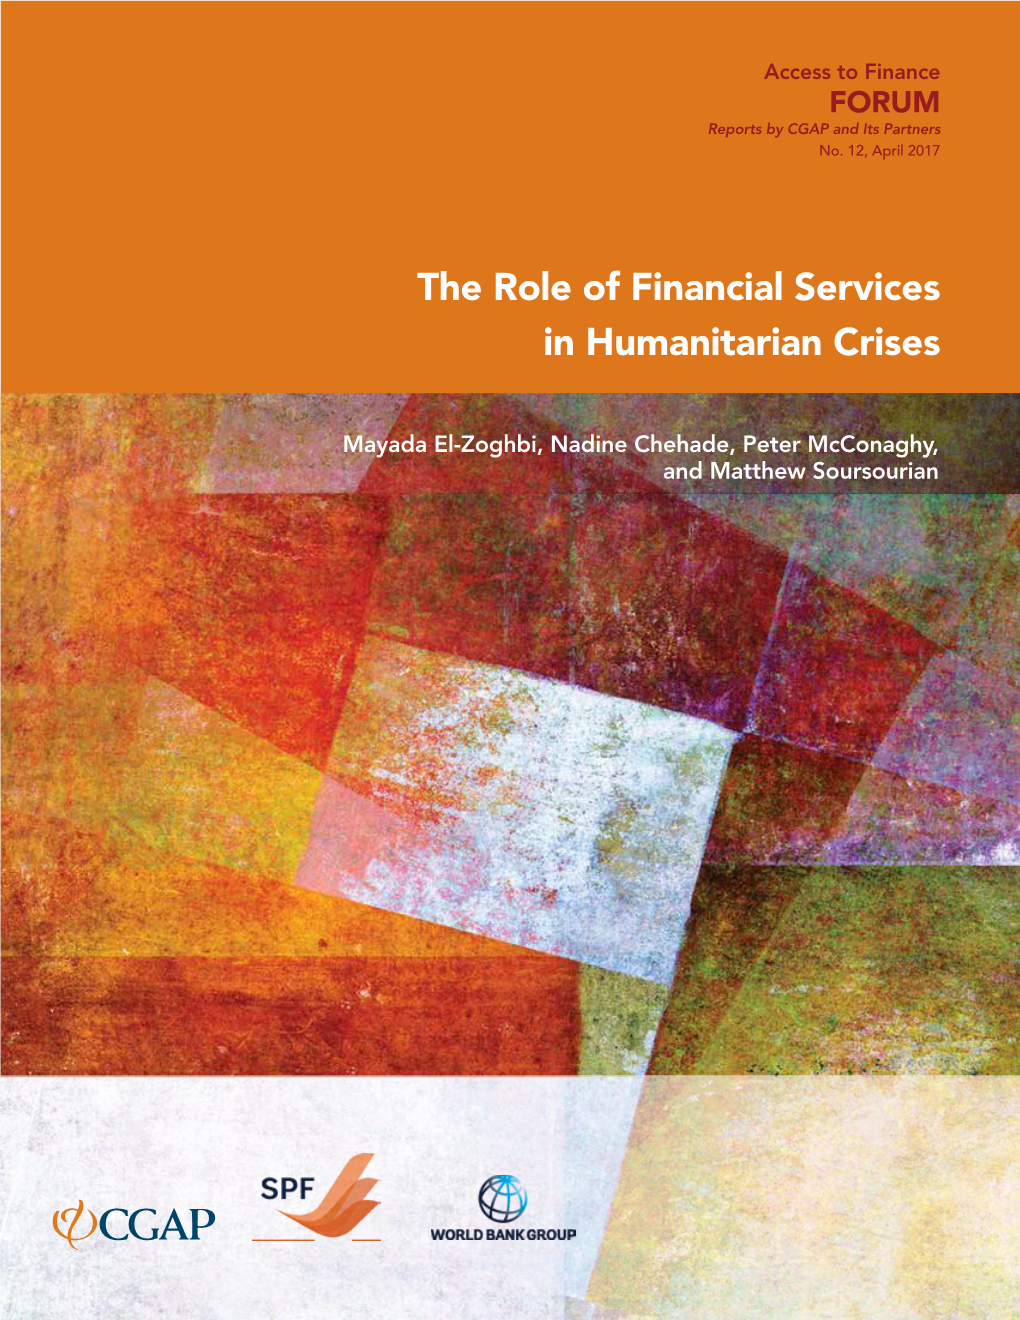 The Role of Financial Services in Humanitarian Crises